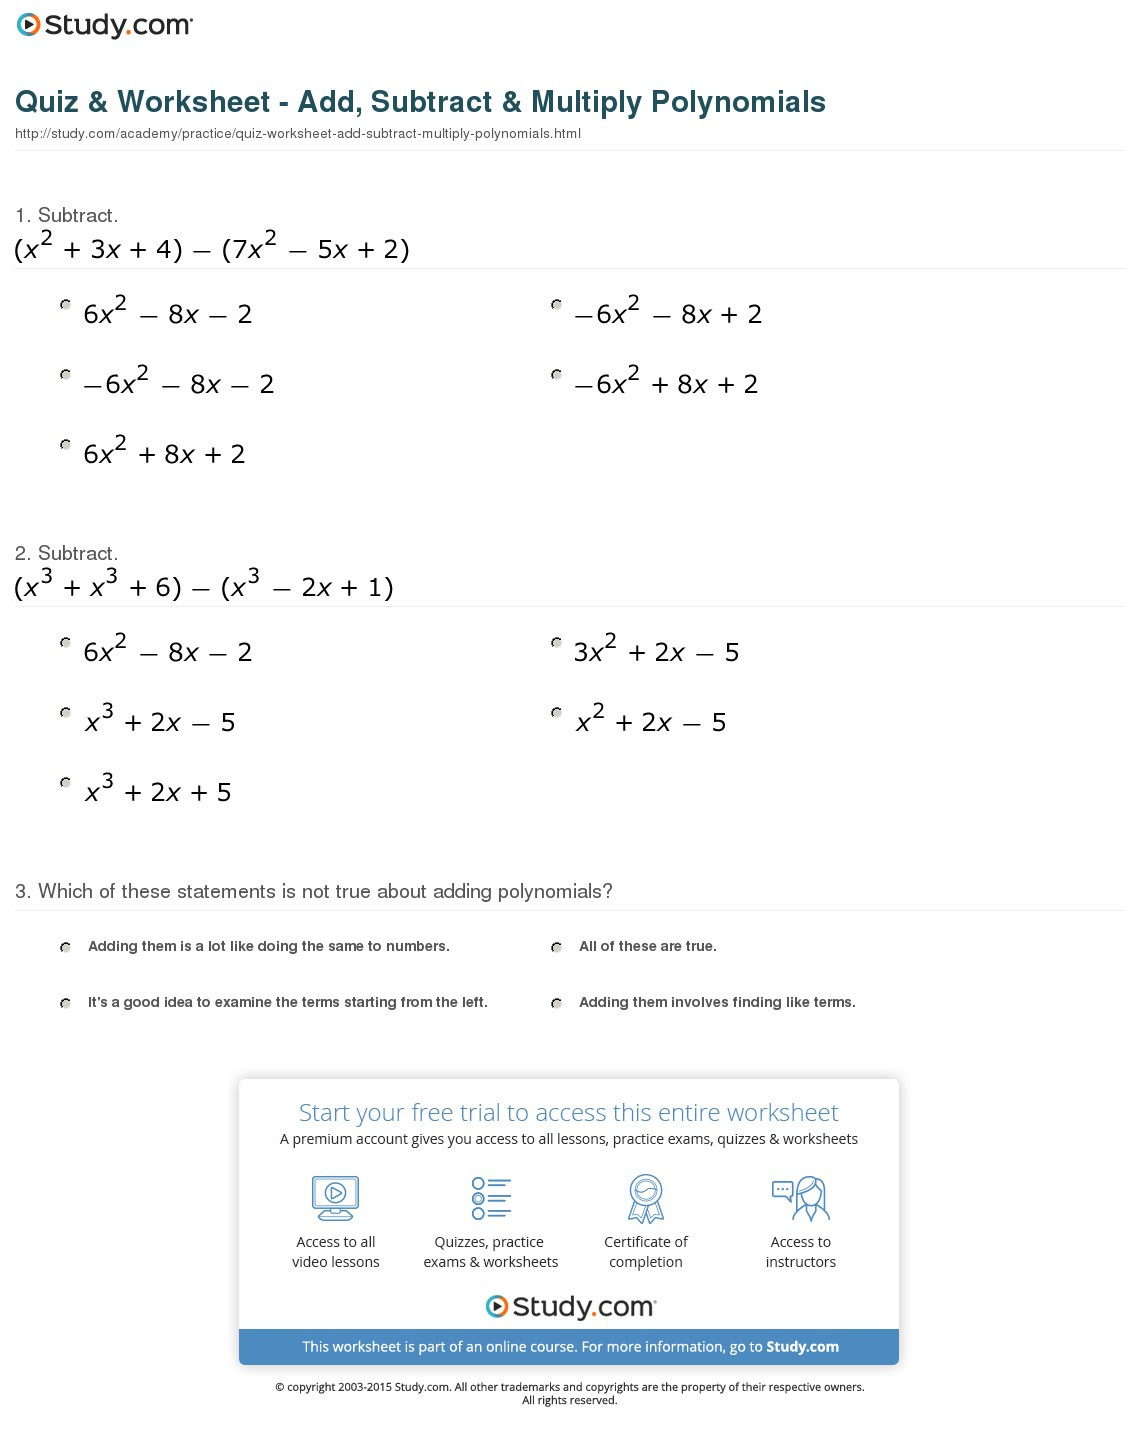 multiplying-polynomials-worksheet-1-answers-db-excel